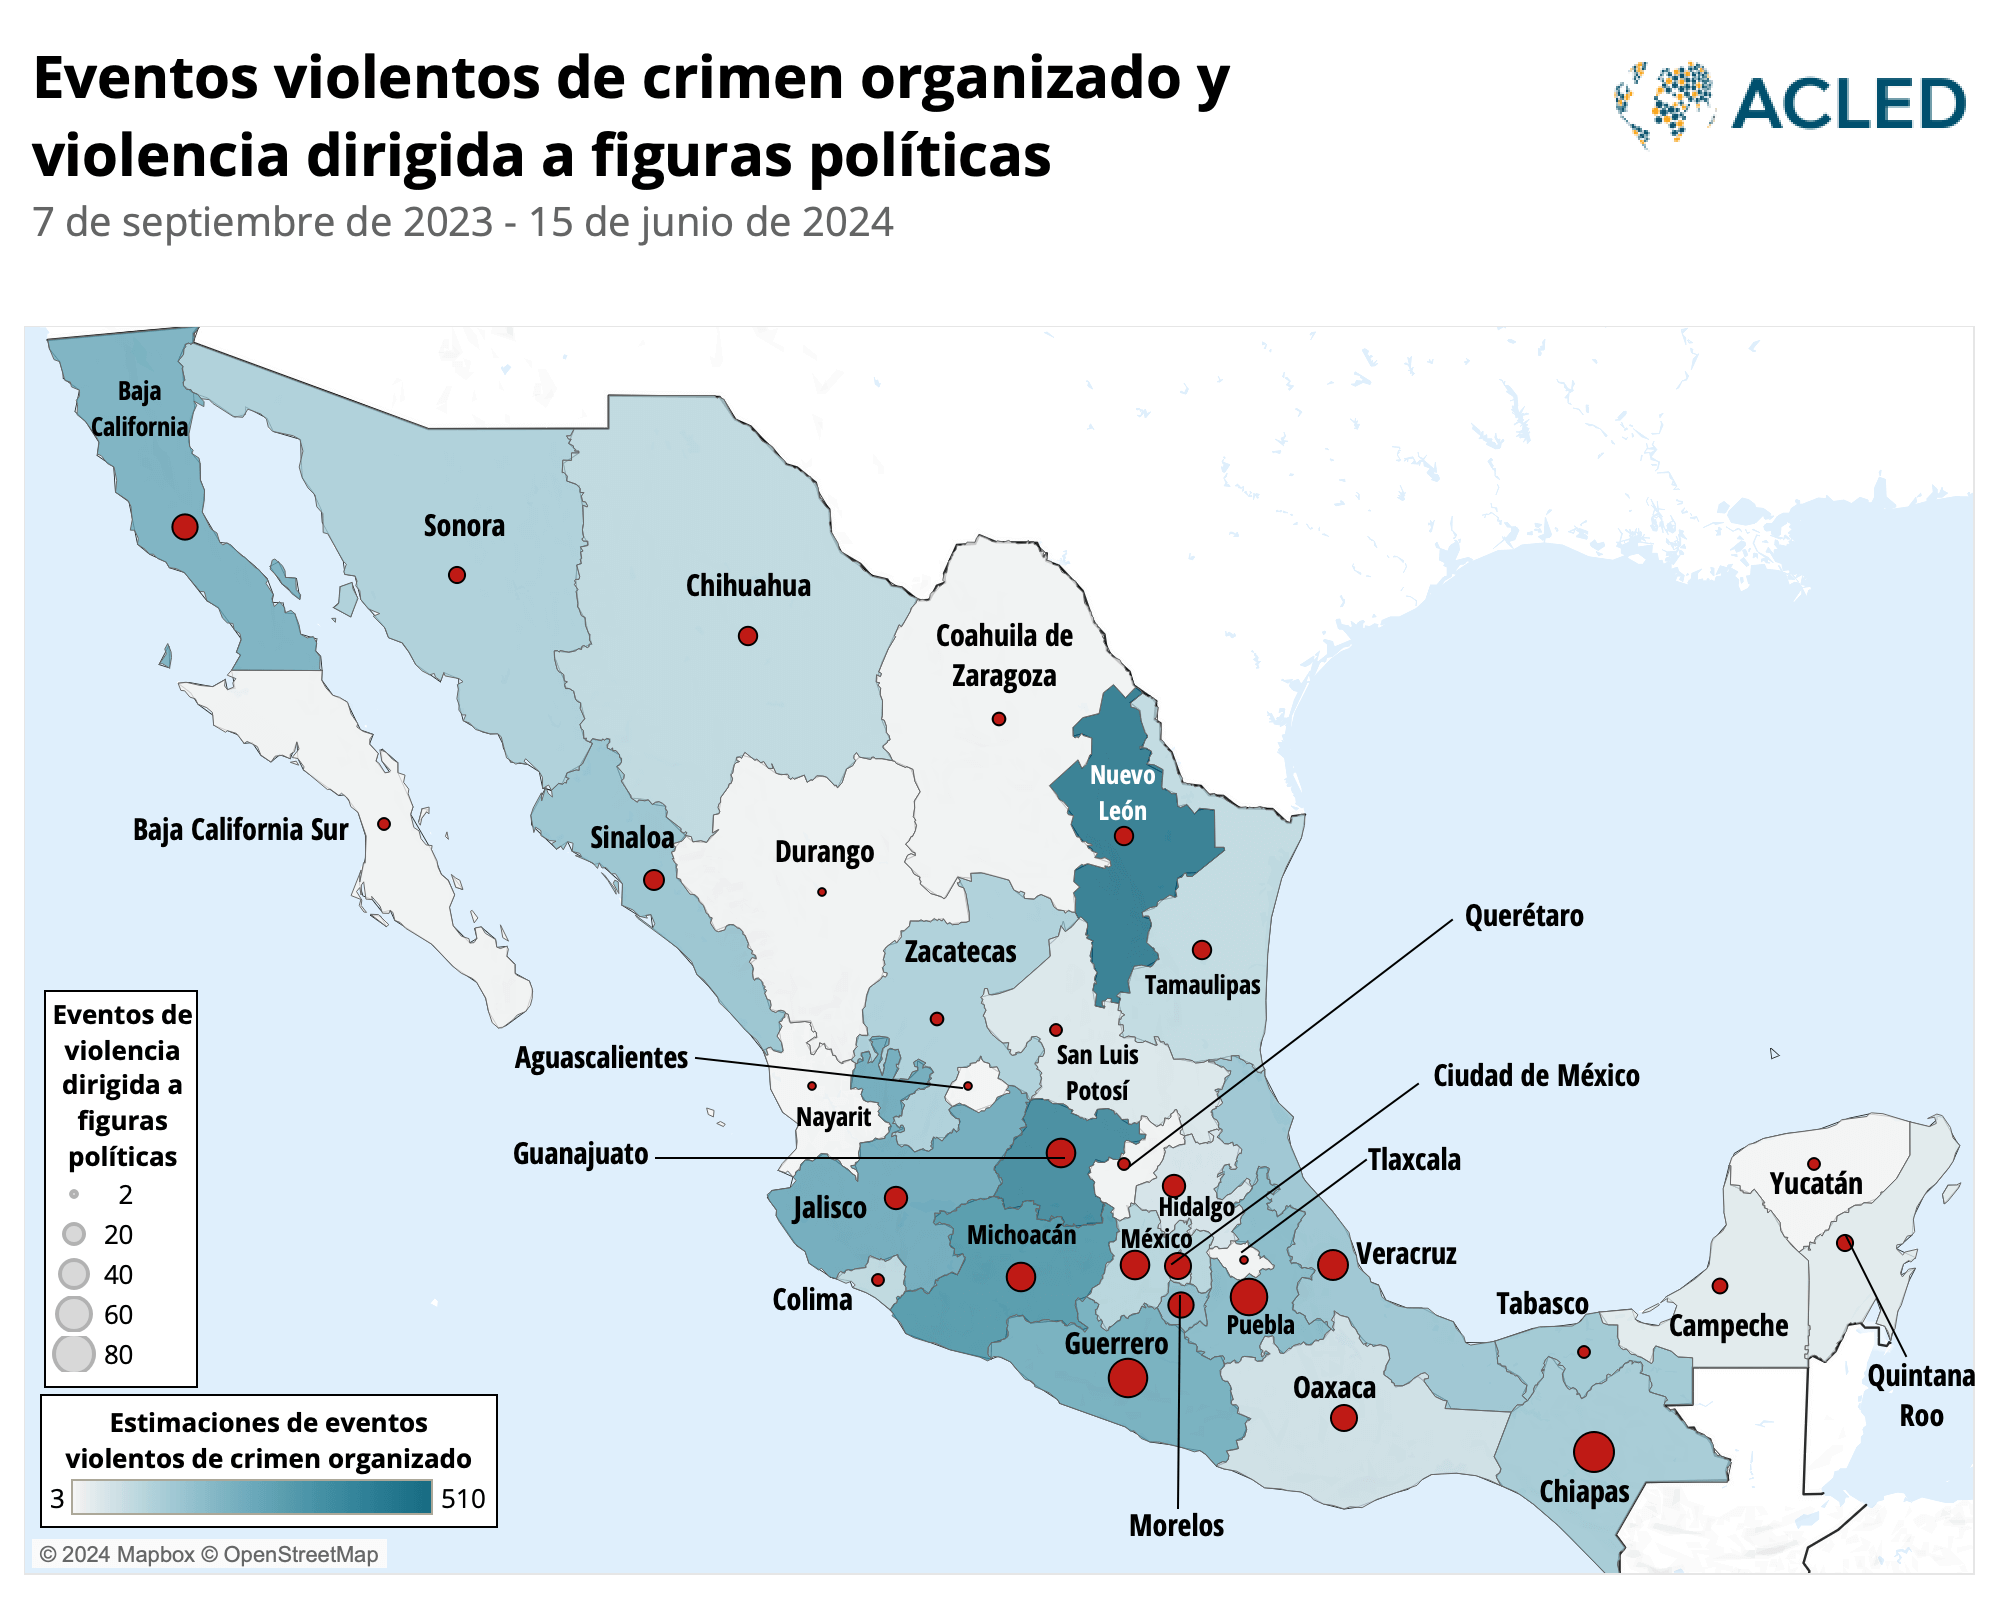 Map - Estimated gang violence and targeting of political figures in Mexico - 7 Sept 2023 - 15 June 2024 - Spanish